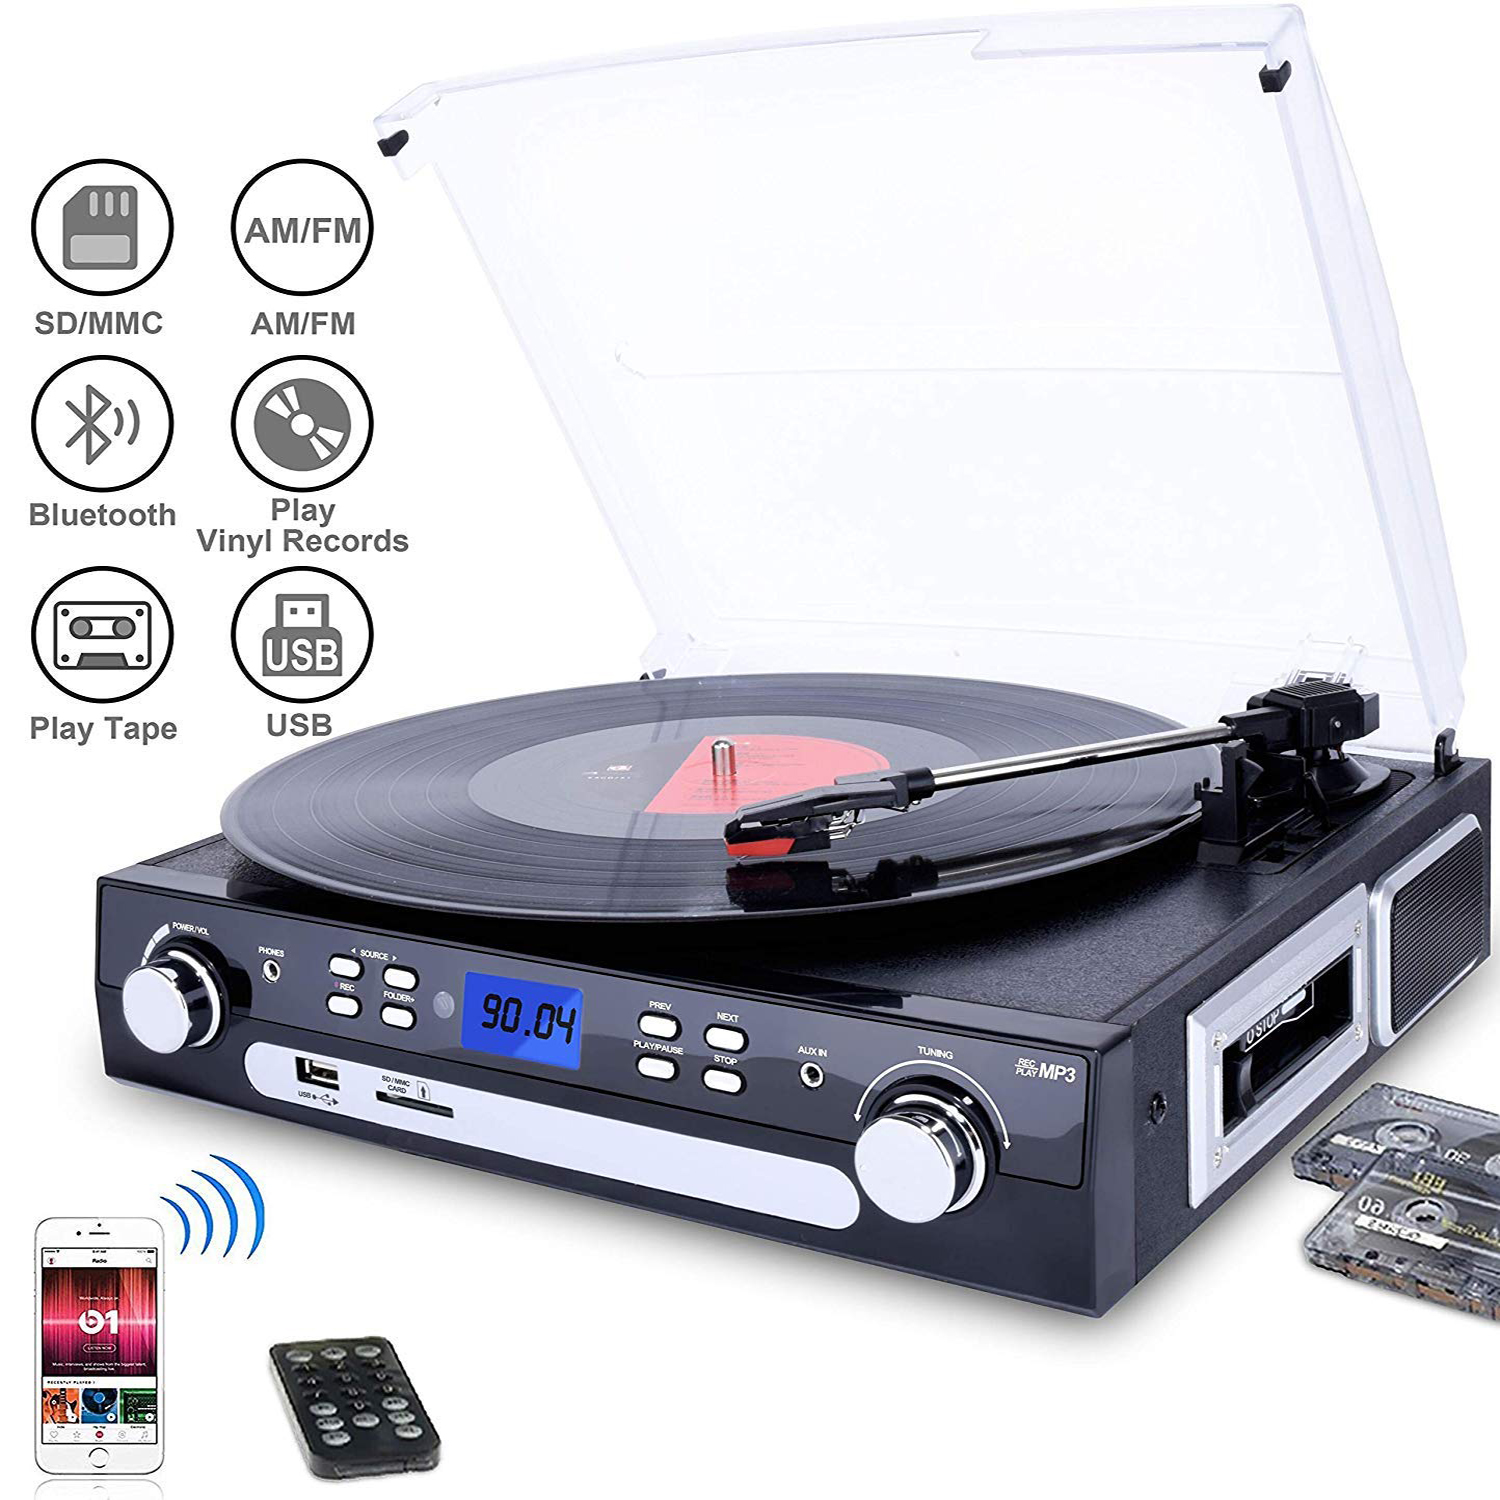 DIGITNOW Vinyl/LP Turntable Record Player, with Bluetooth,AM&FM Radio, Cassette Tape, Aux in, USB/SD Encoding & Playing MP3/ Built-in Stereo Speakers, 3.5mm Headphone Jack,Remote and LCD